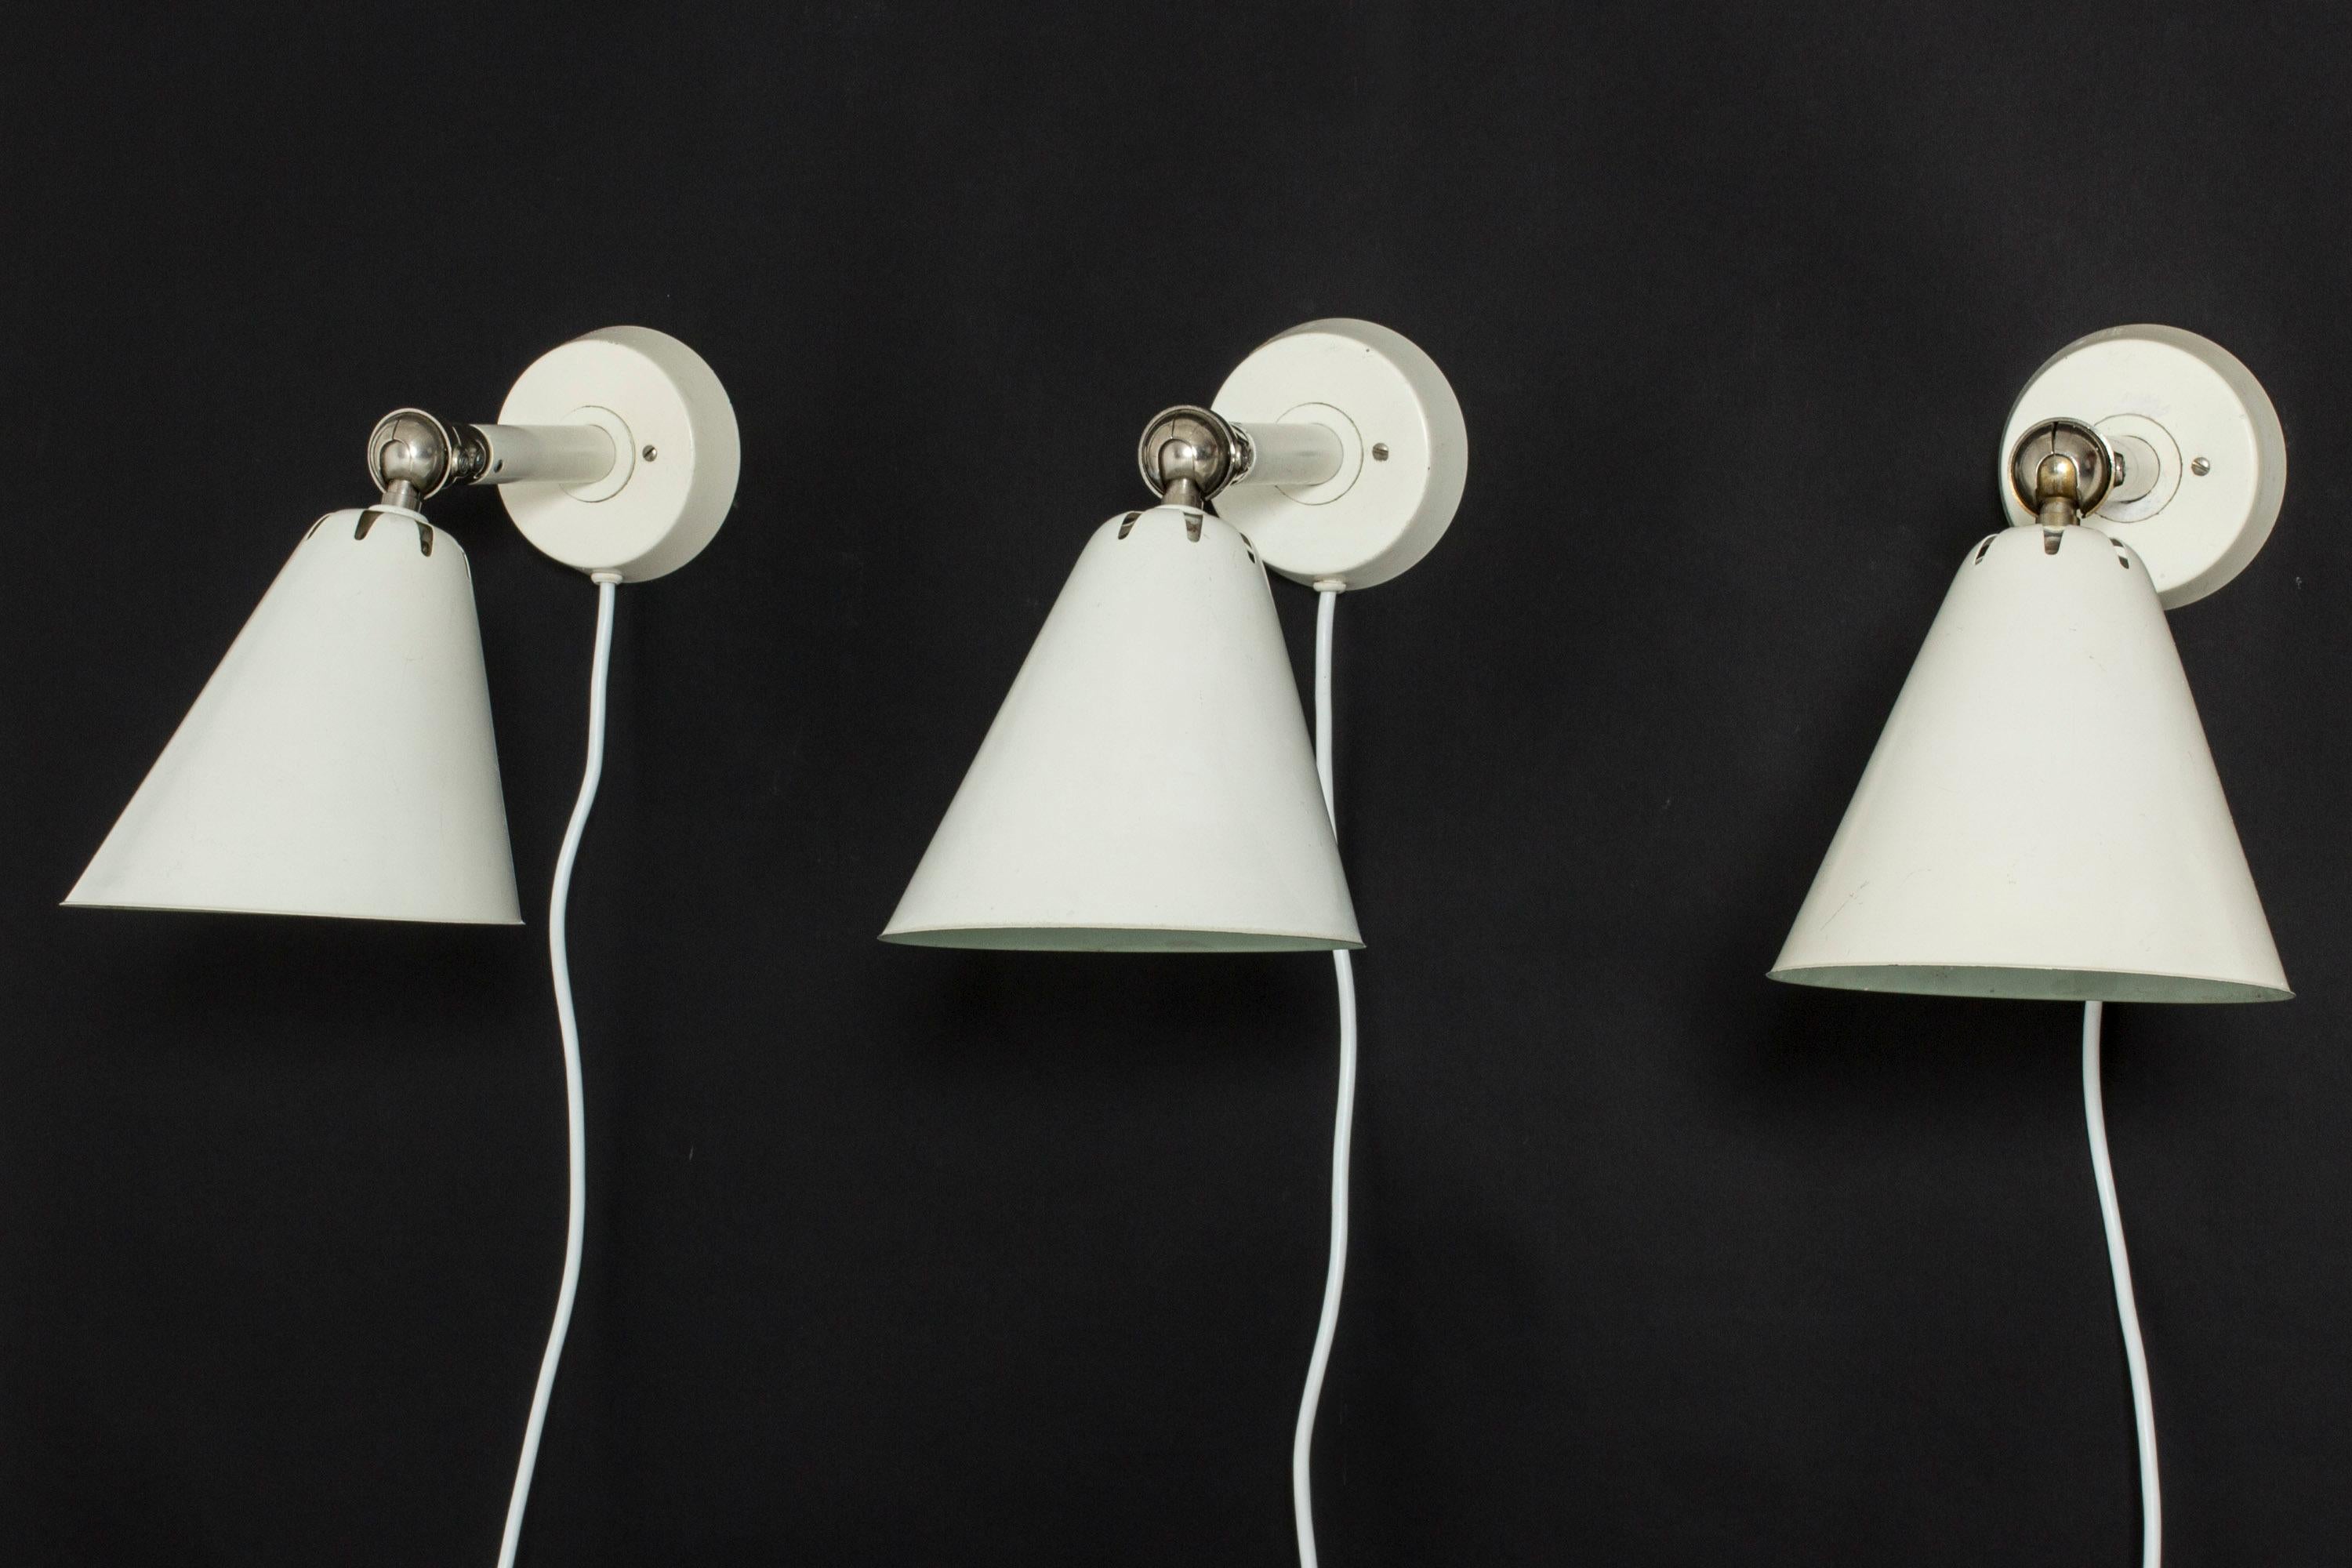 Set of three very cool wall lights from ASEA, made from metal with white lacquer. Industrial look with accentuated joinery on the necks.